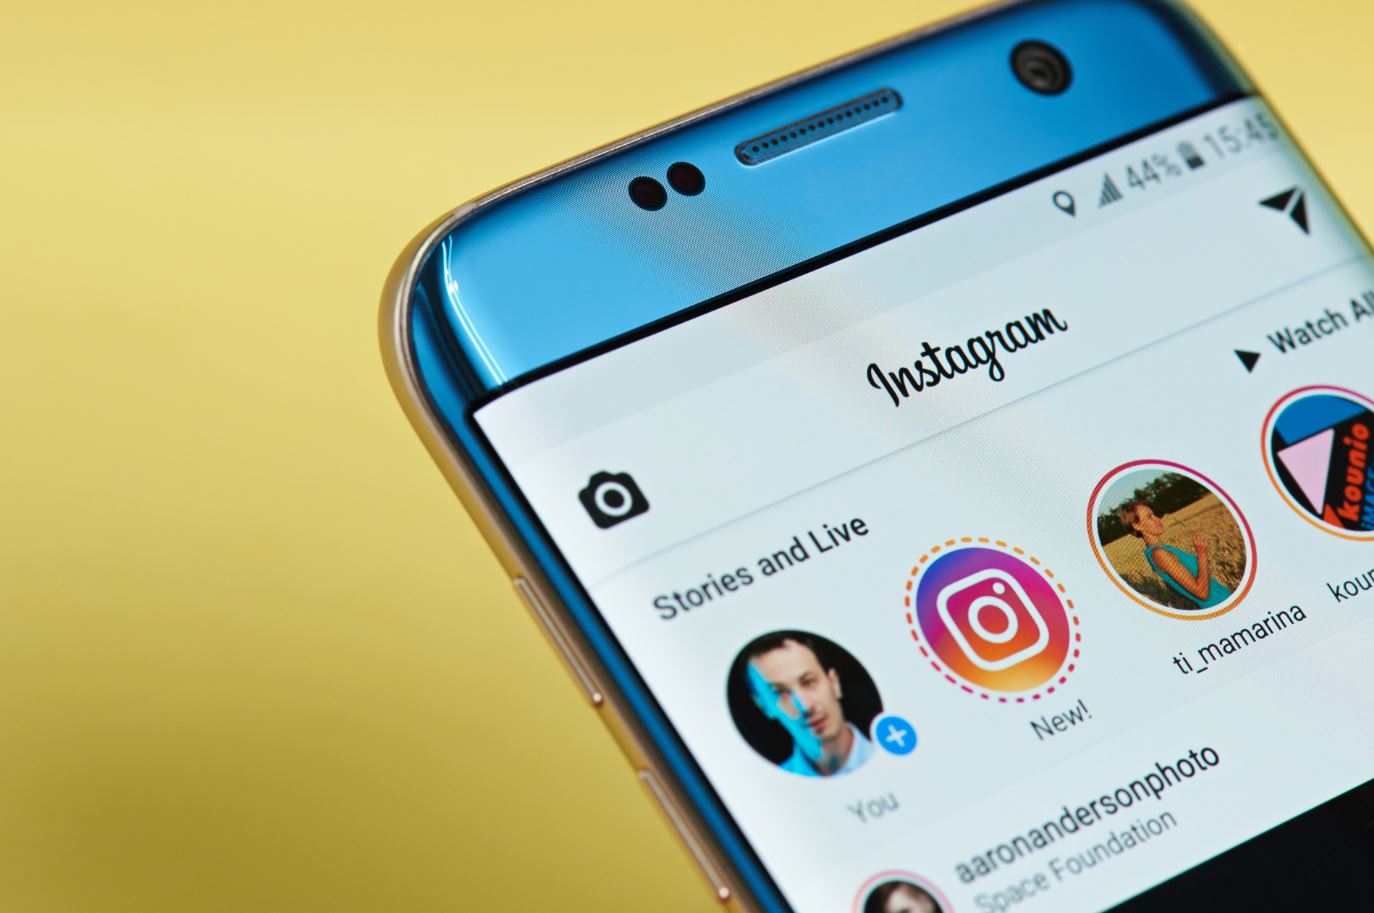 Use your Instagram account to drive leads